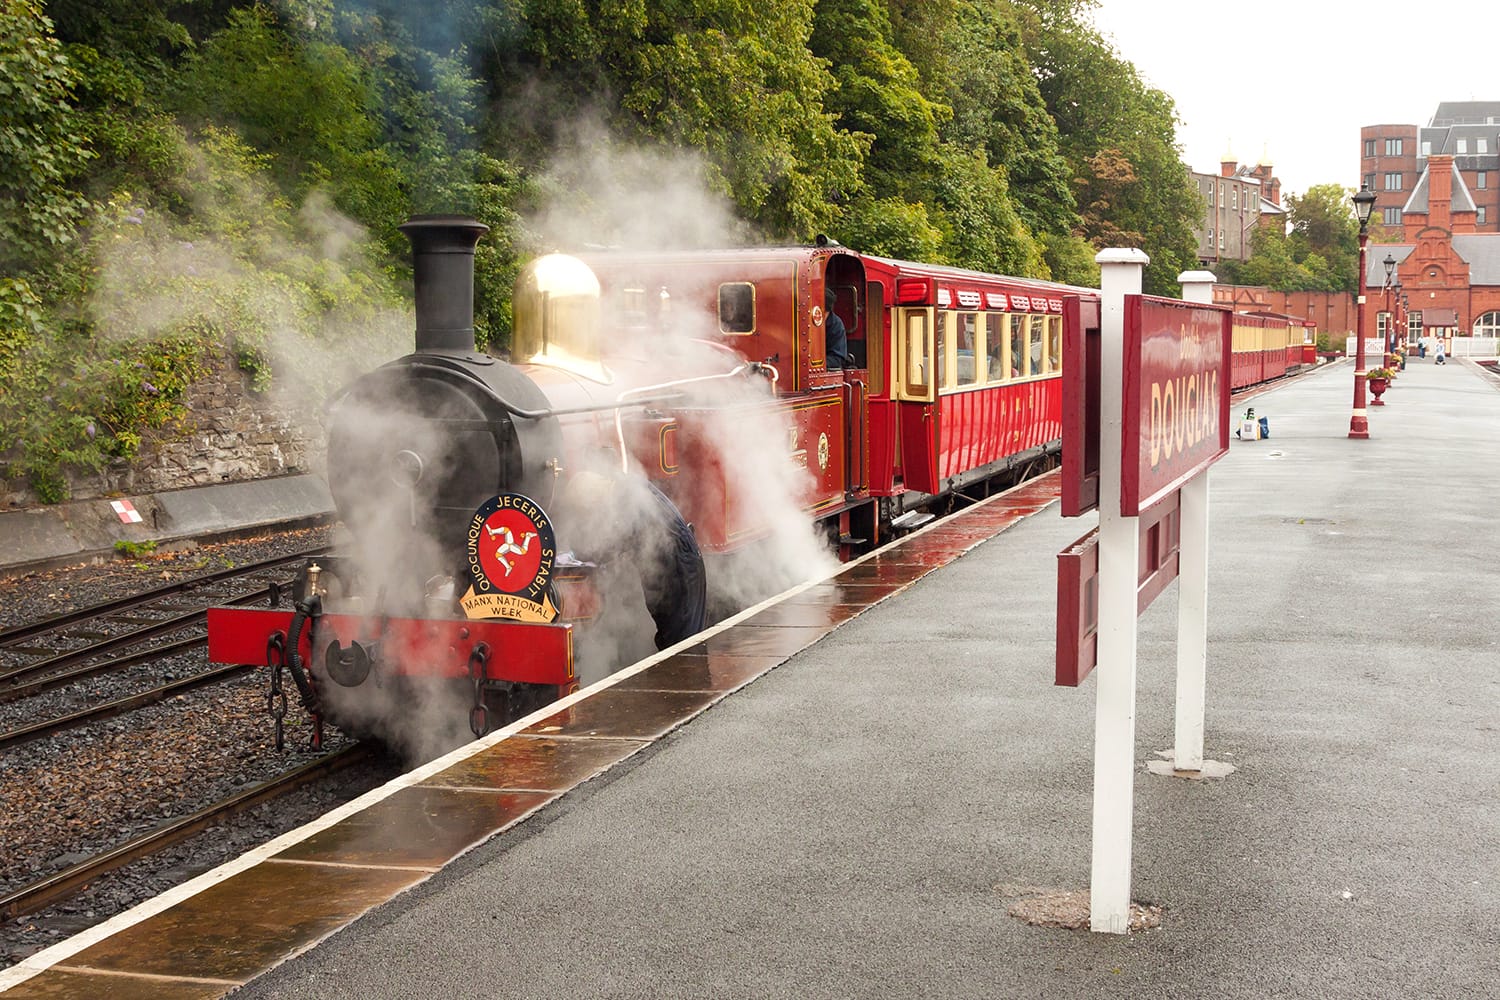 The red steam locomotive with train of IMR line in puffs of vapour prepares to depart from the platform of Douglas railway terminal station